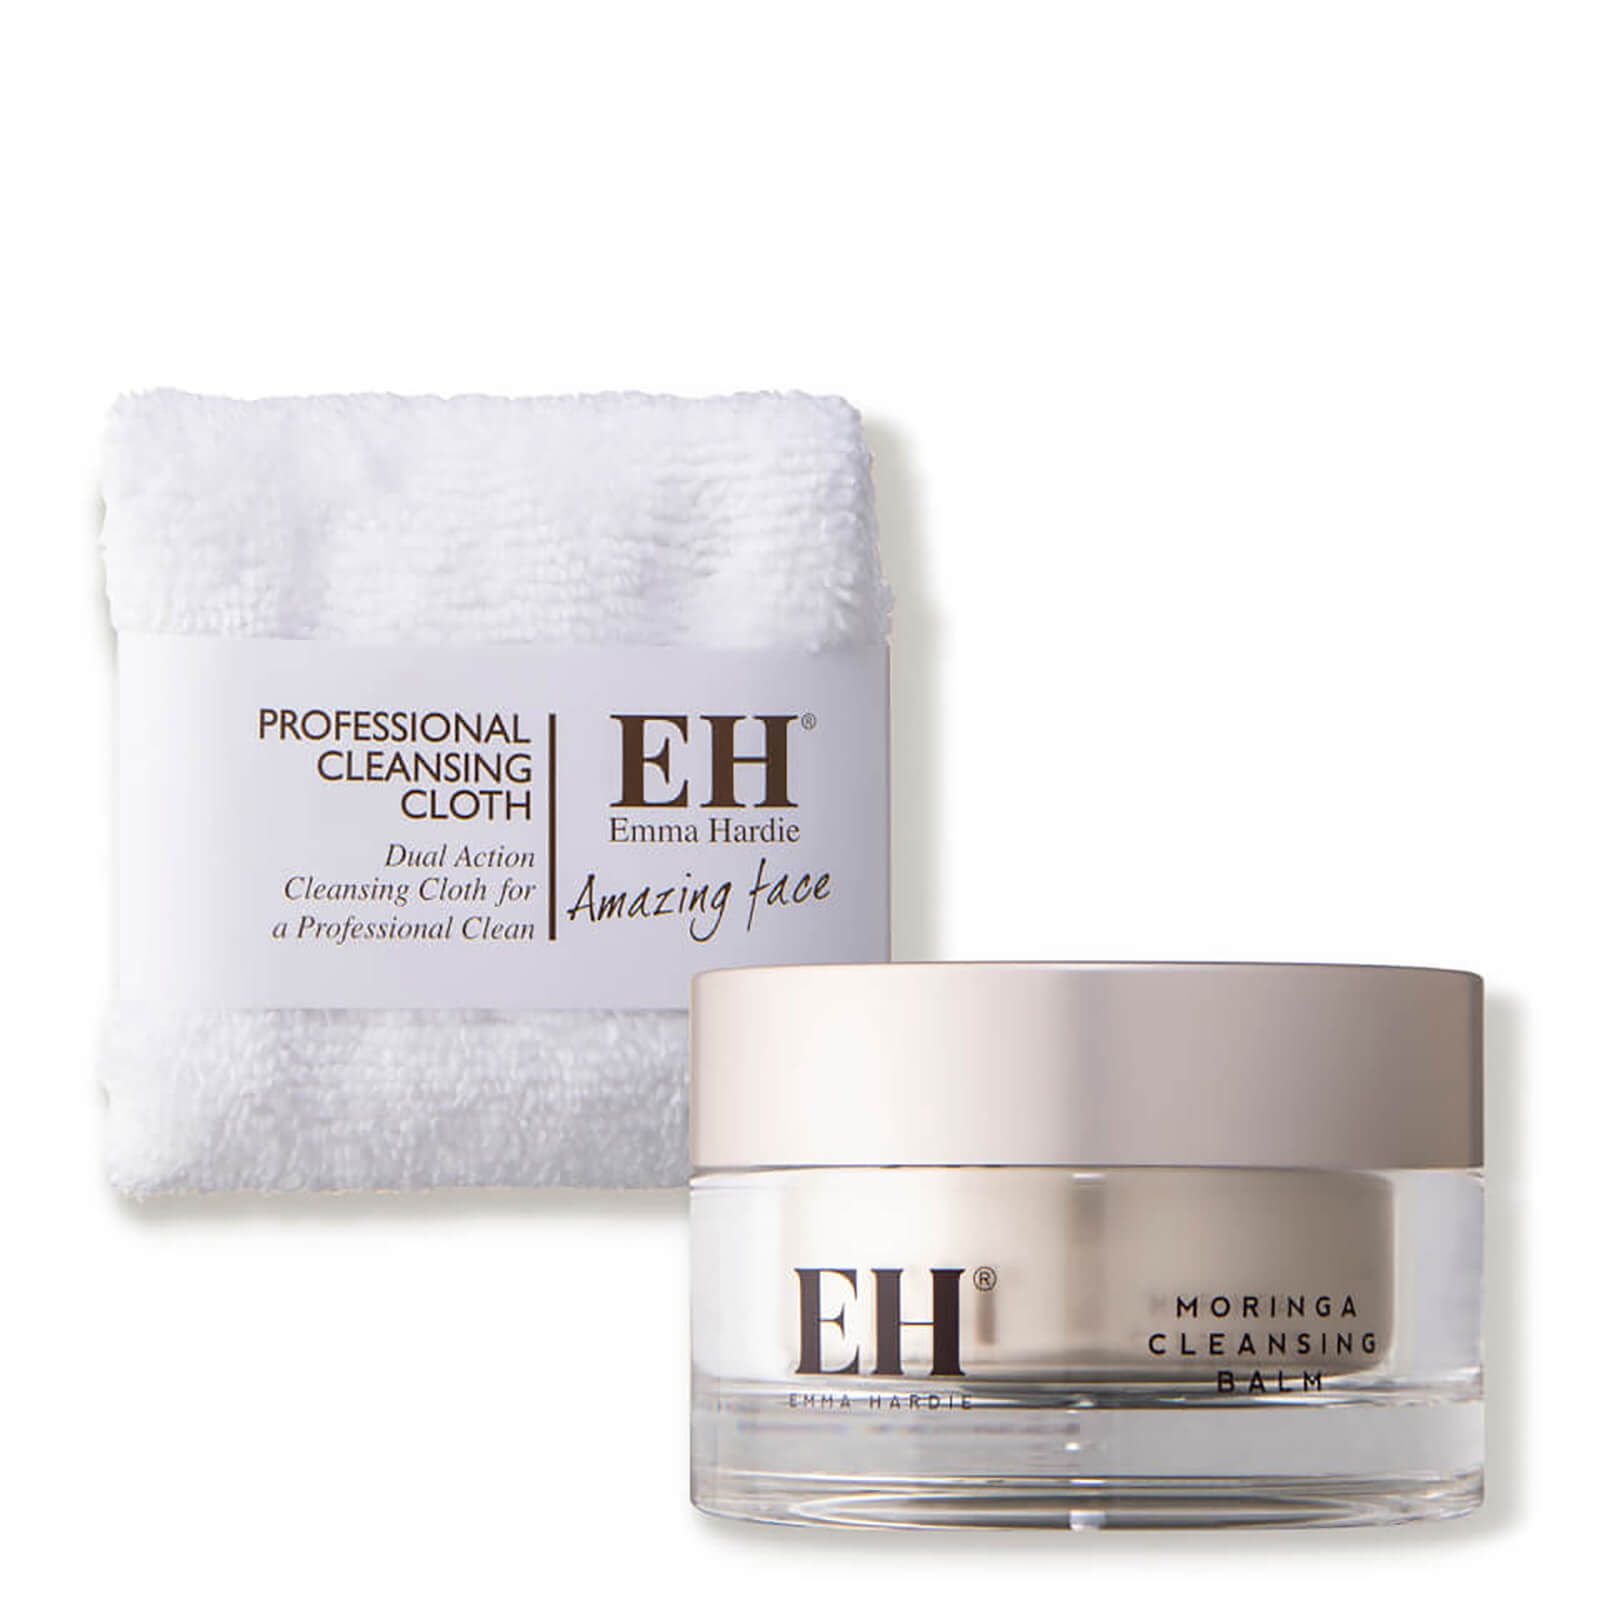 Emma Hardie Moringa Cleansing Balm with Professional Cleansing Cloth 100g | Cult Beauty (Global)